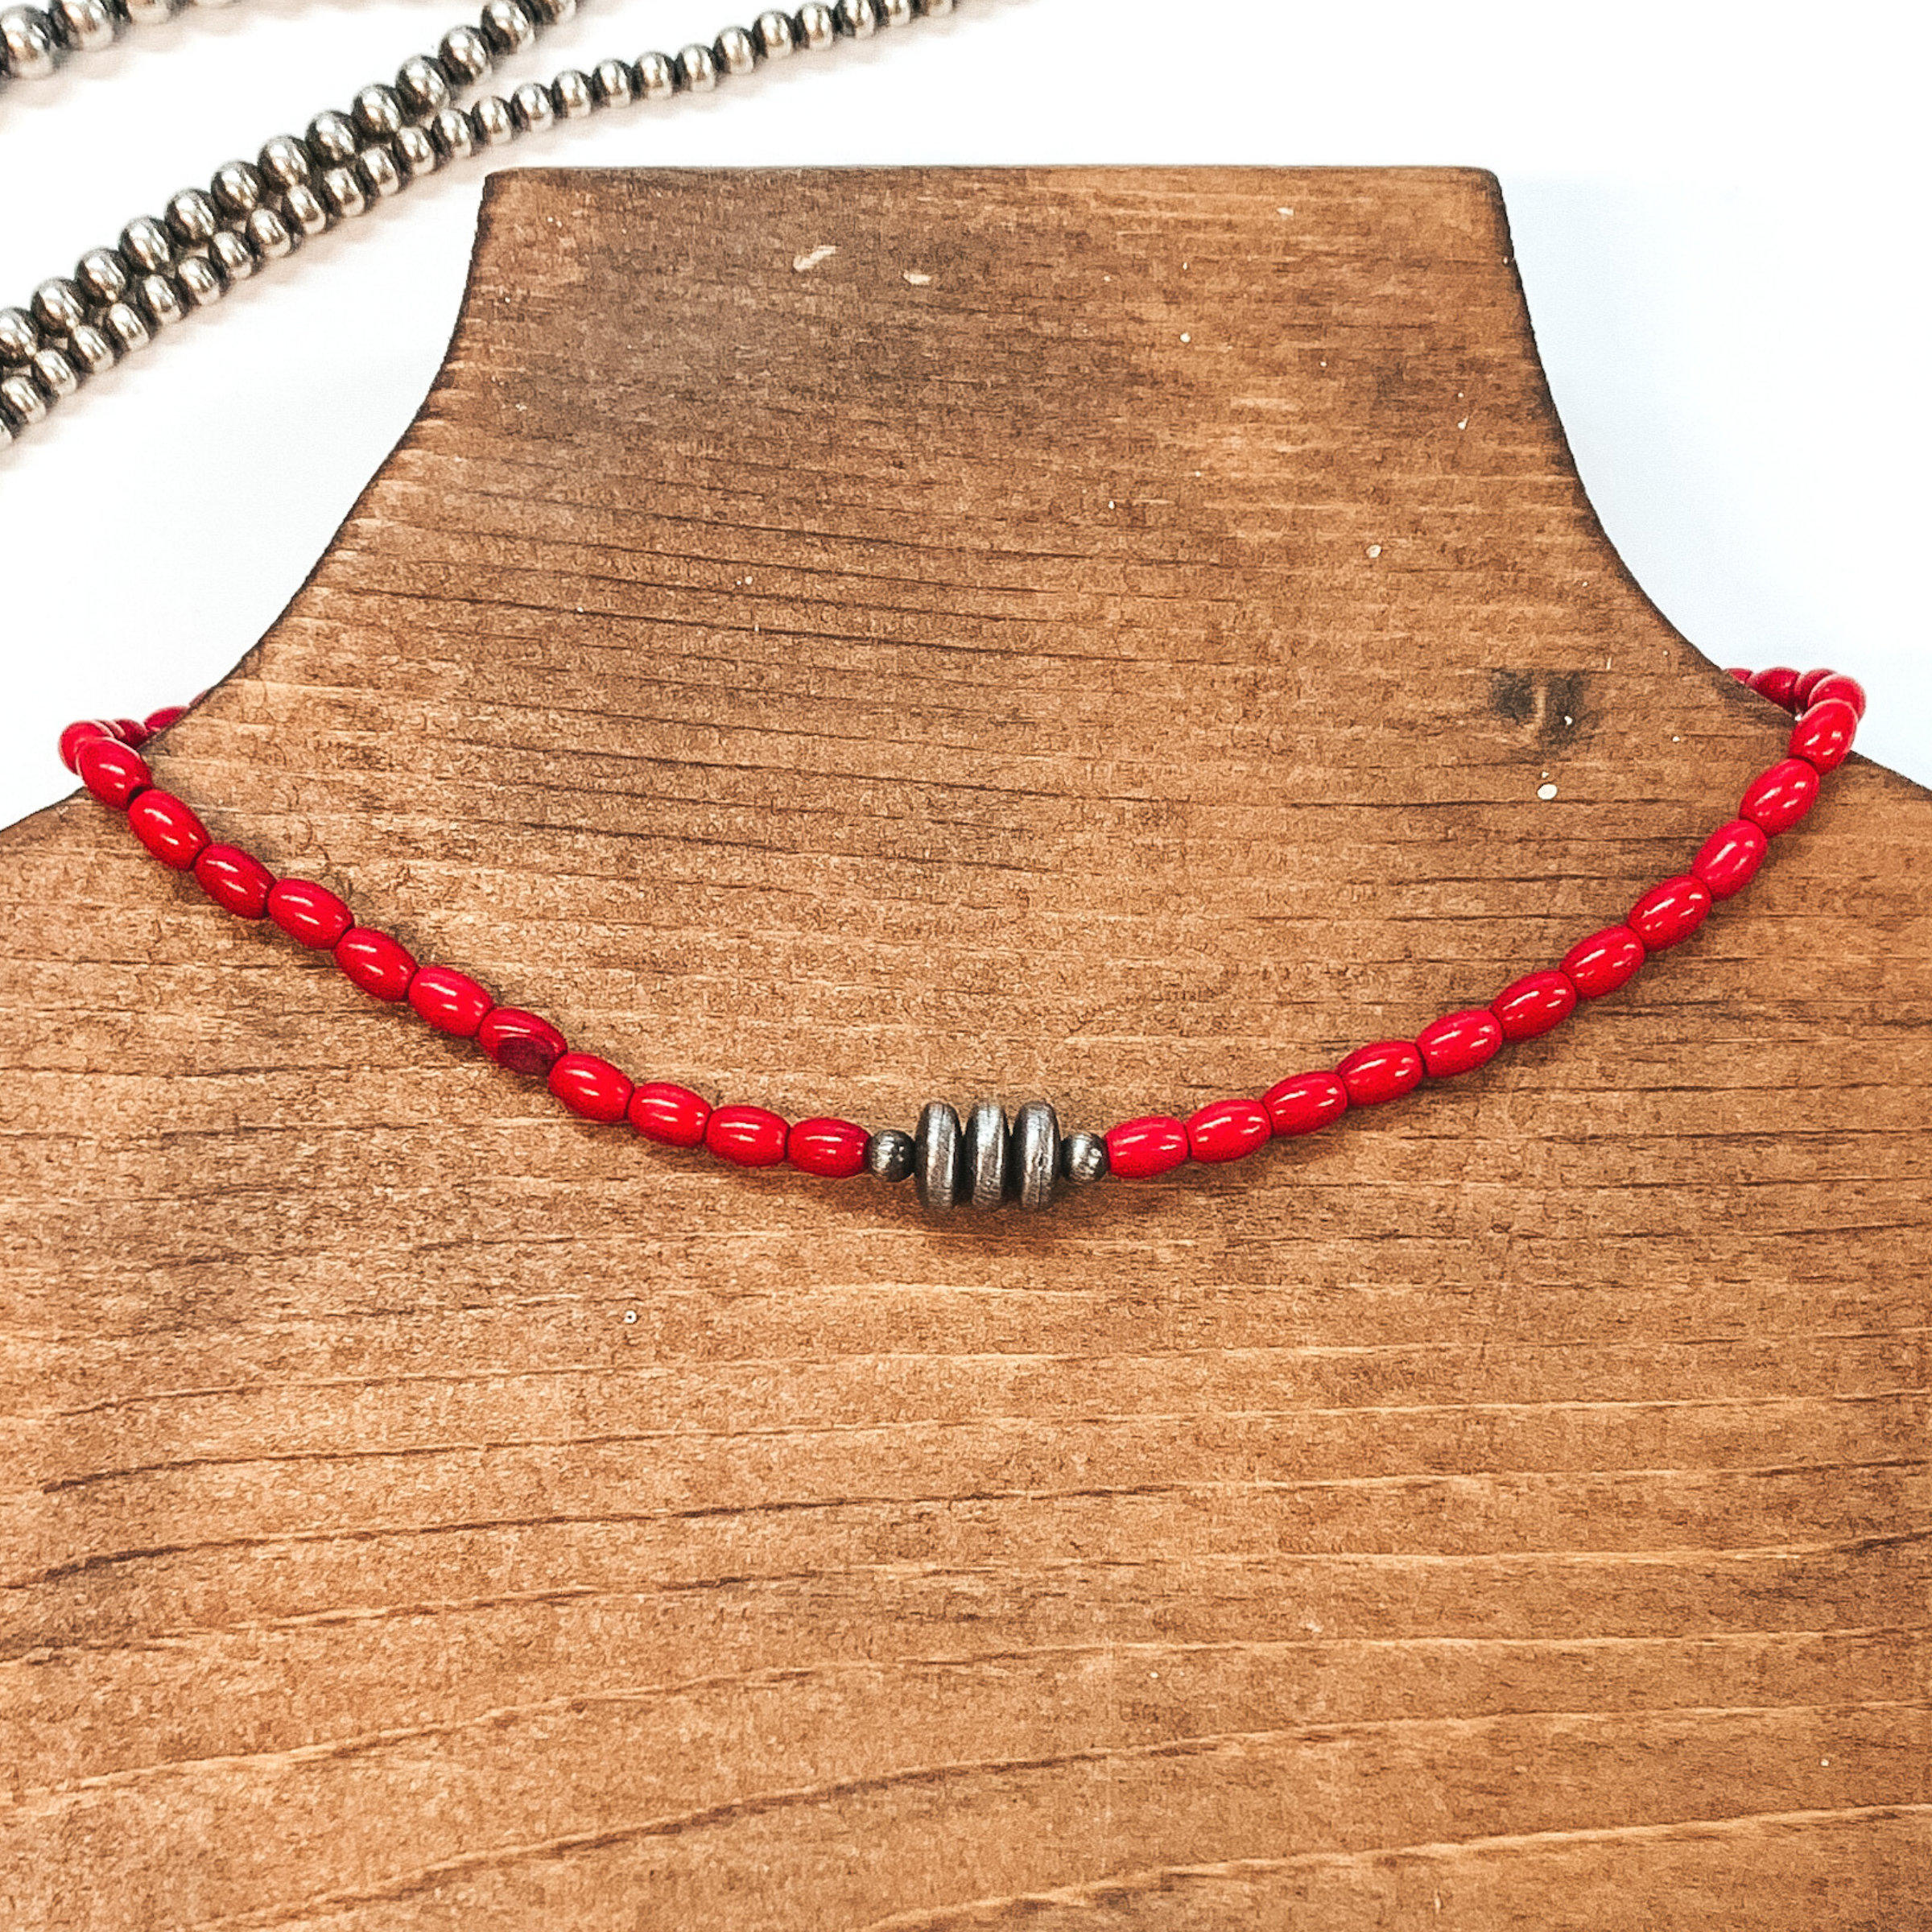 Red beaded necklace with silver, saucer beads in the center. This necklace is pictured on a brown necklace holder on a white background with silver beads in the background.